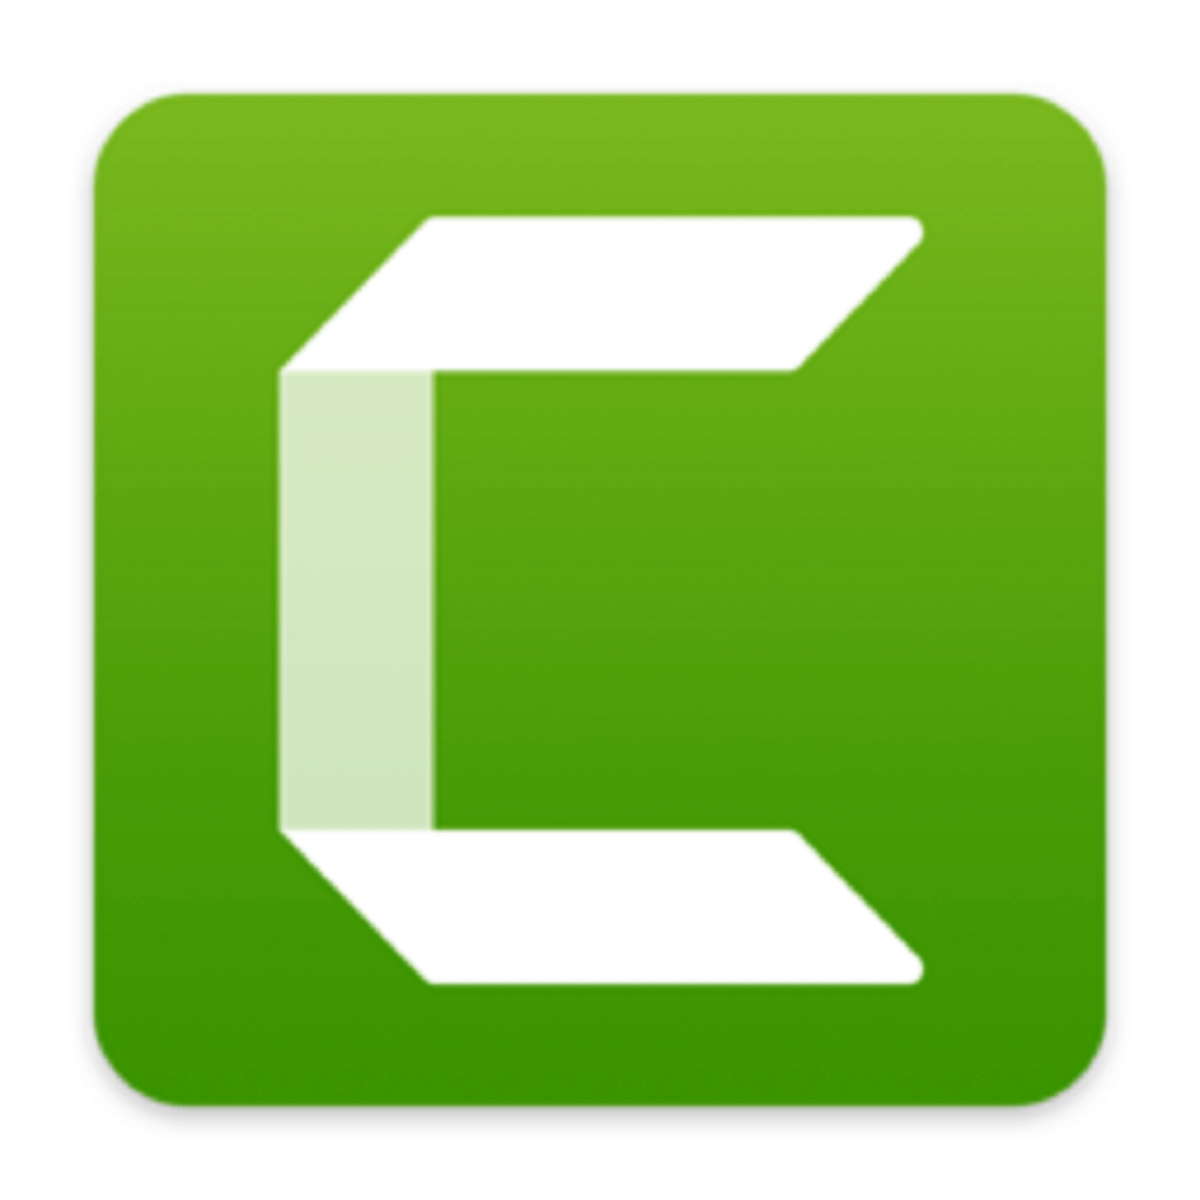 Camtasia Logo - FIX: Camtasia Studio cannot connect to the activation server